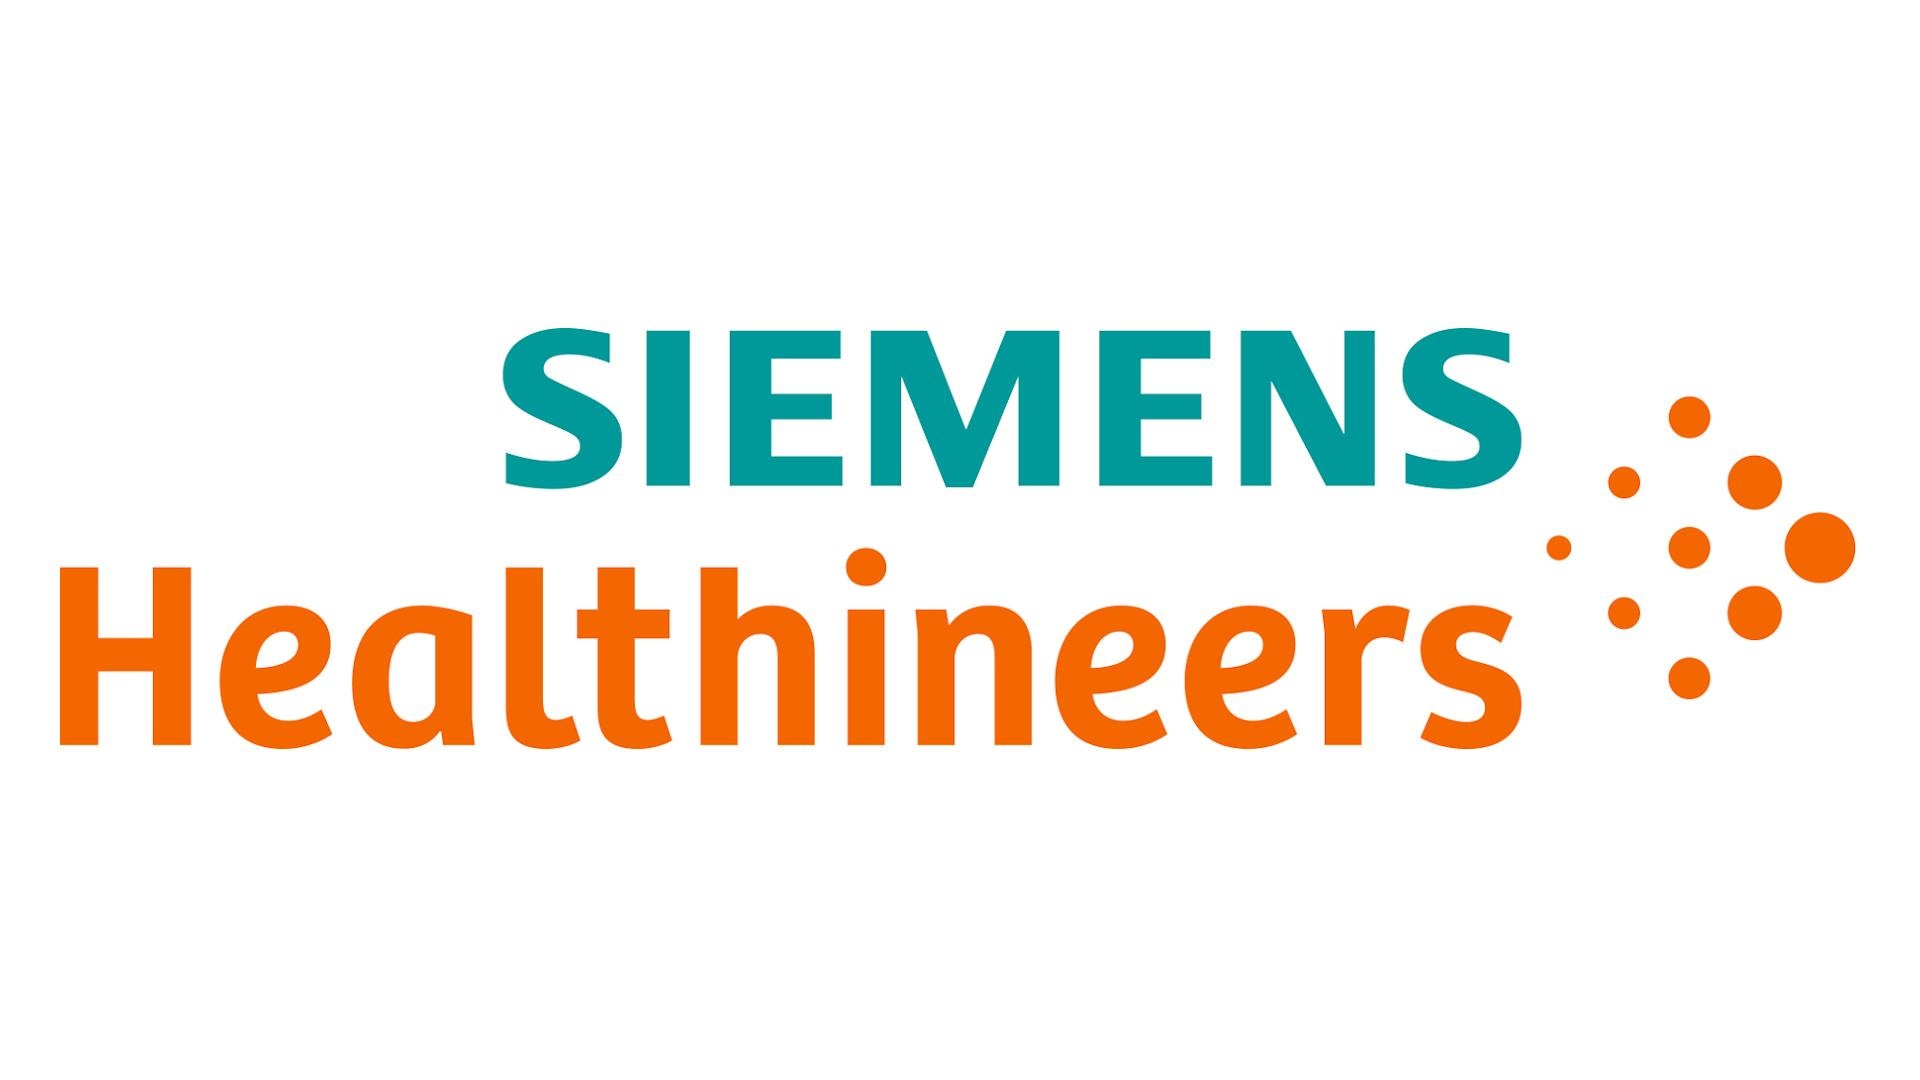 Siemens: The company bringing breakthrough innovations to market, Medical technologies, Healthcare. 1920x1080 Full HD Background.